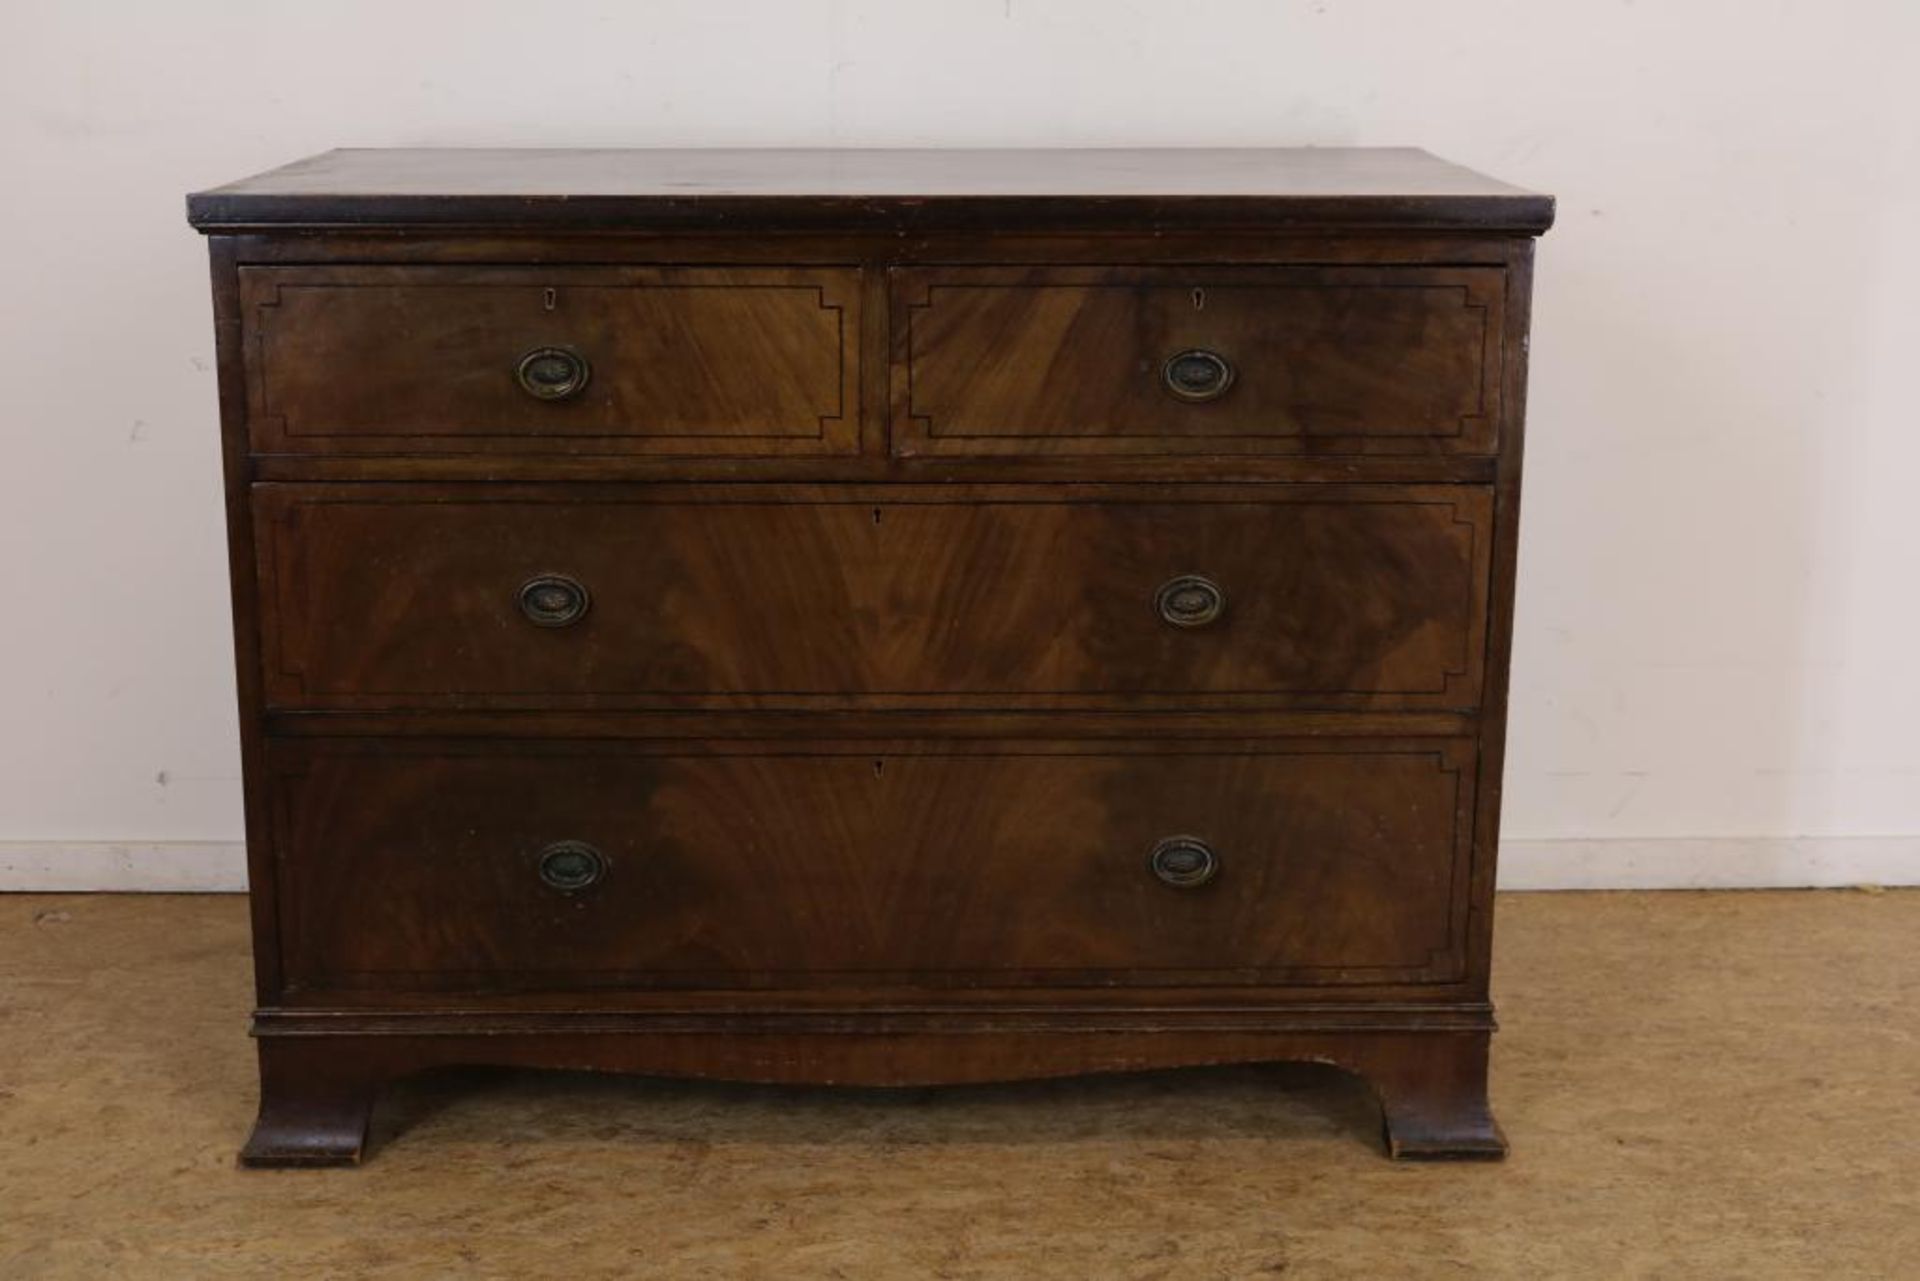 Mahogany Edwardiaan Hobbs & Co londen chest with 4 drawers, England ca. 1900. (Maple & Co)